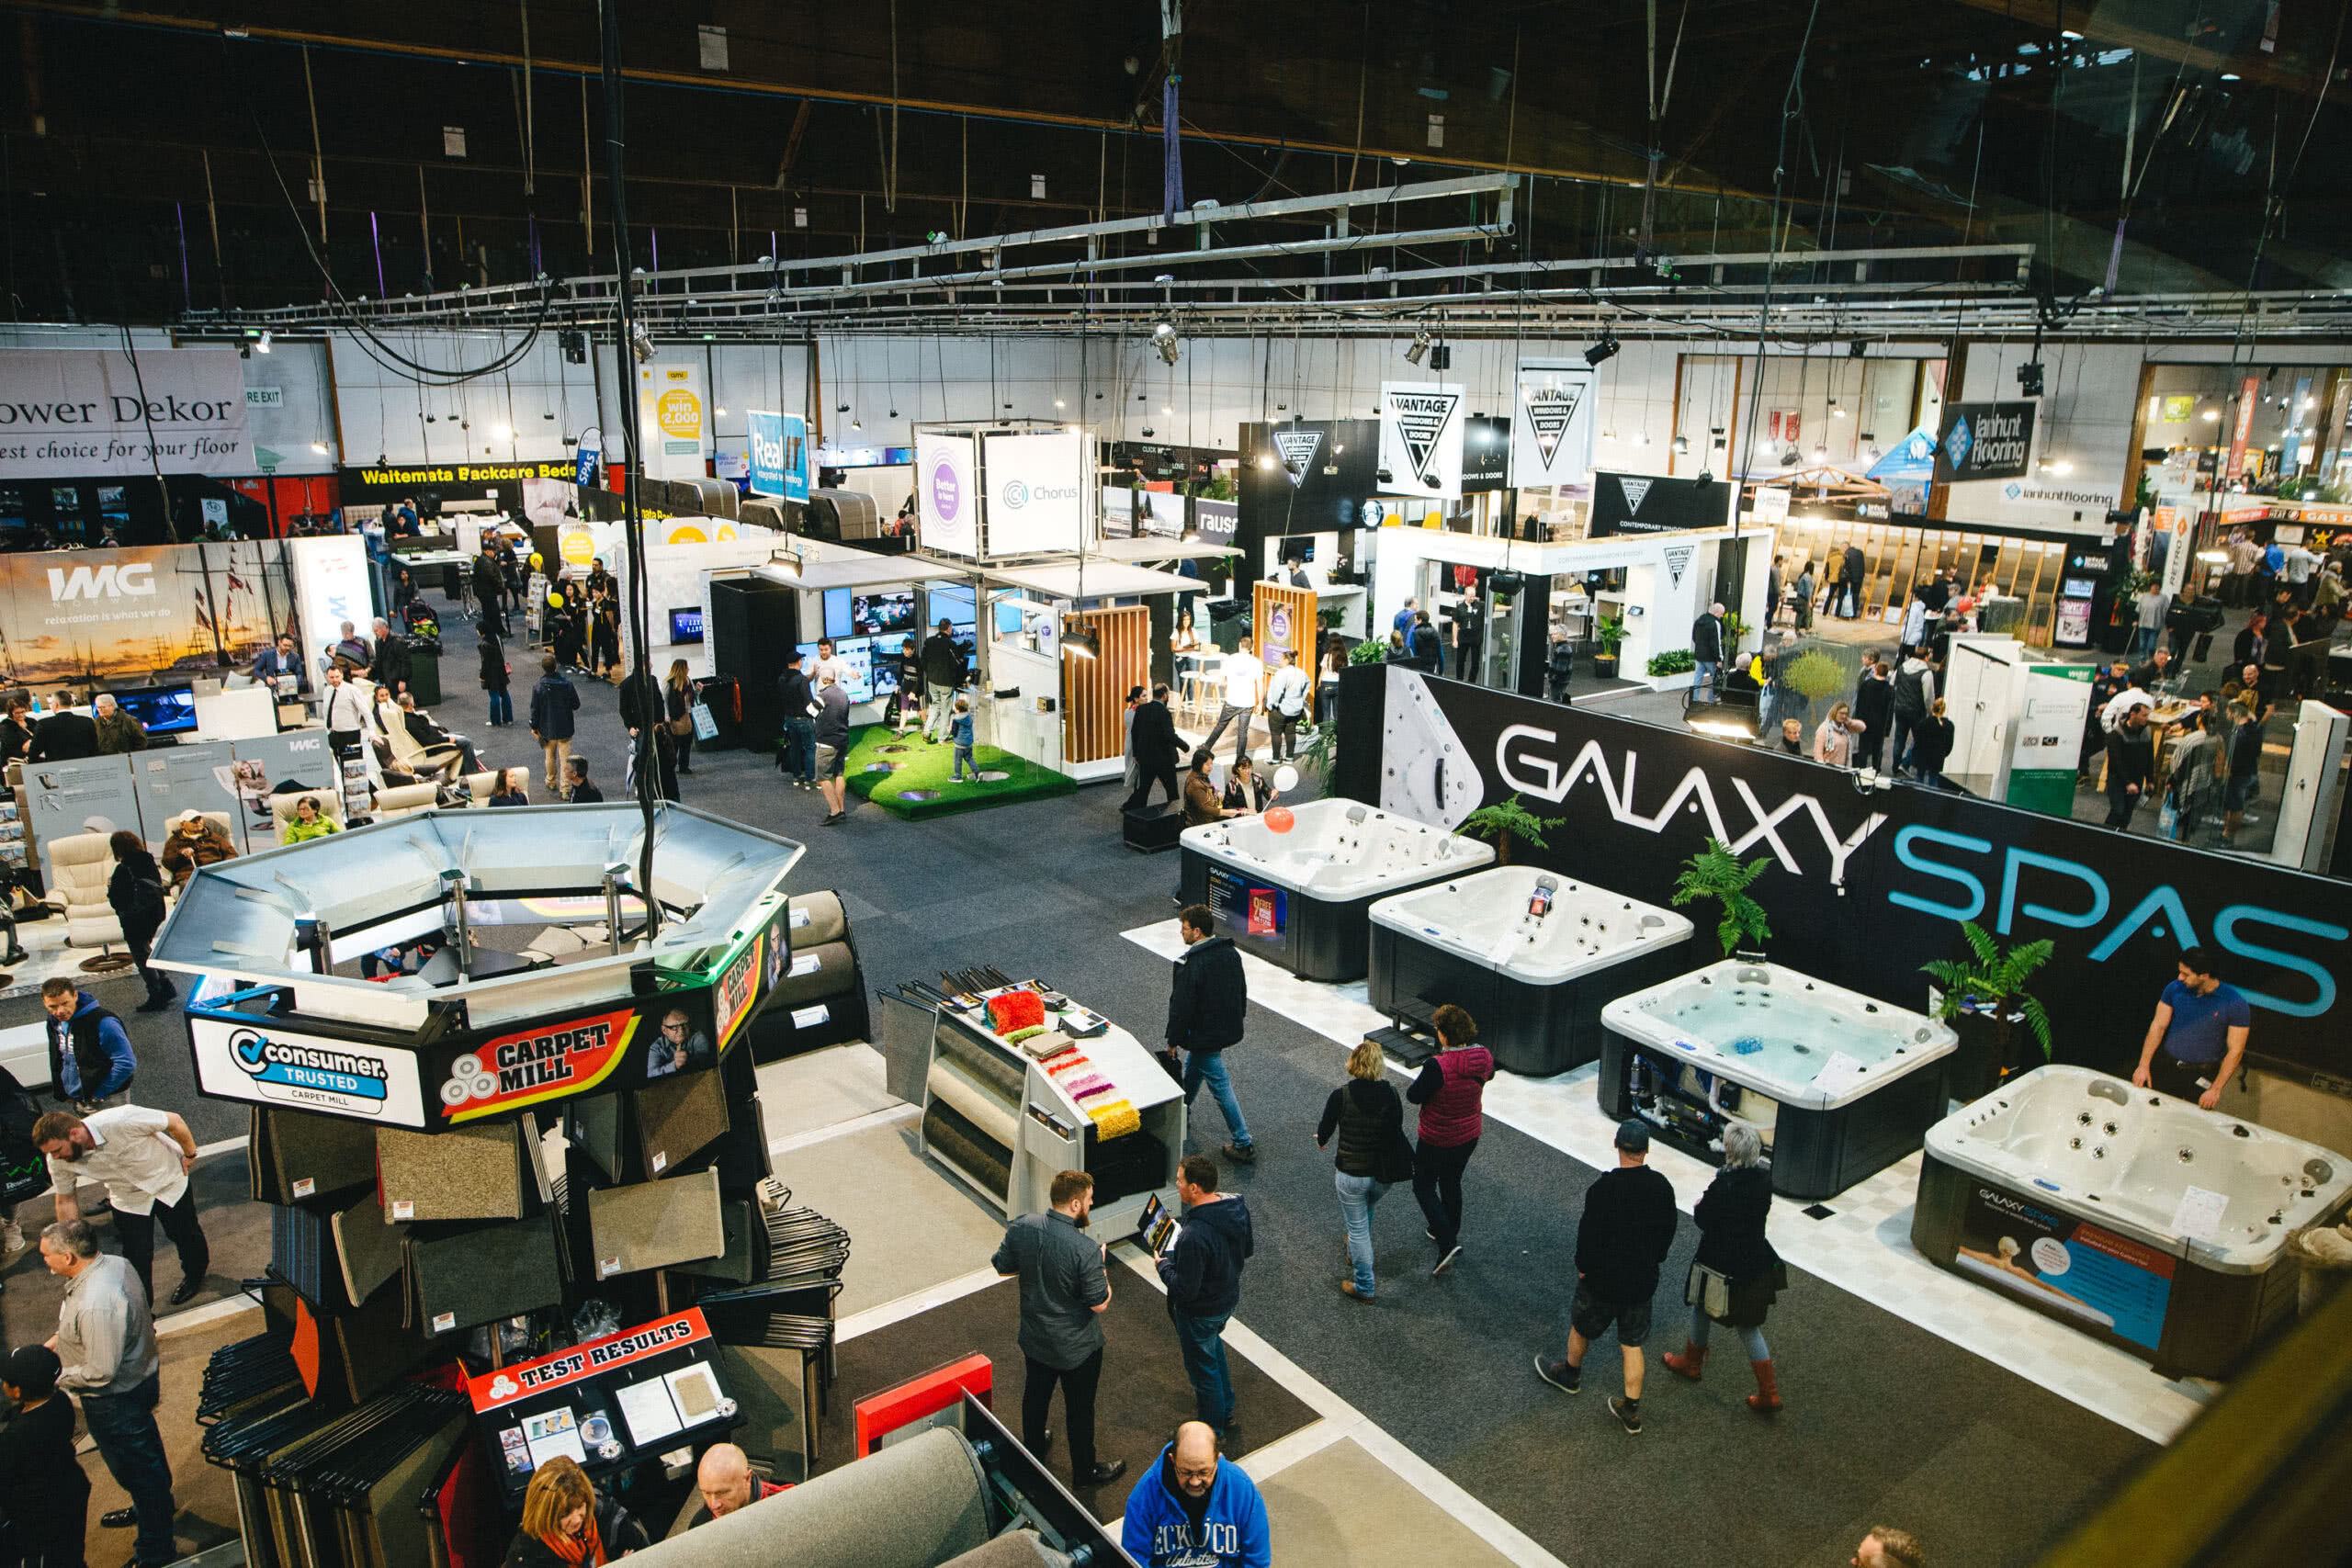 5 Trade Show Tips to Make Your Exhibit Successful